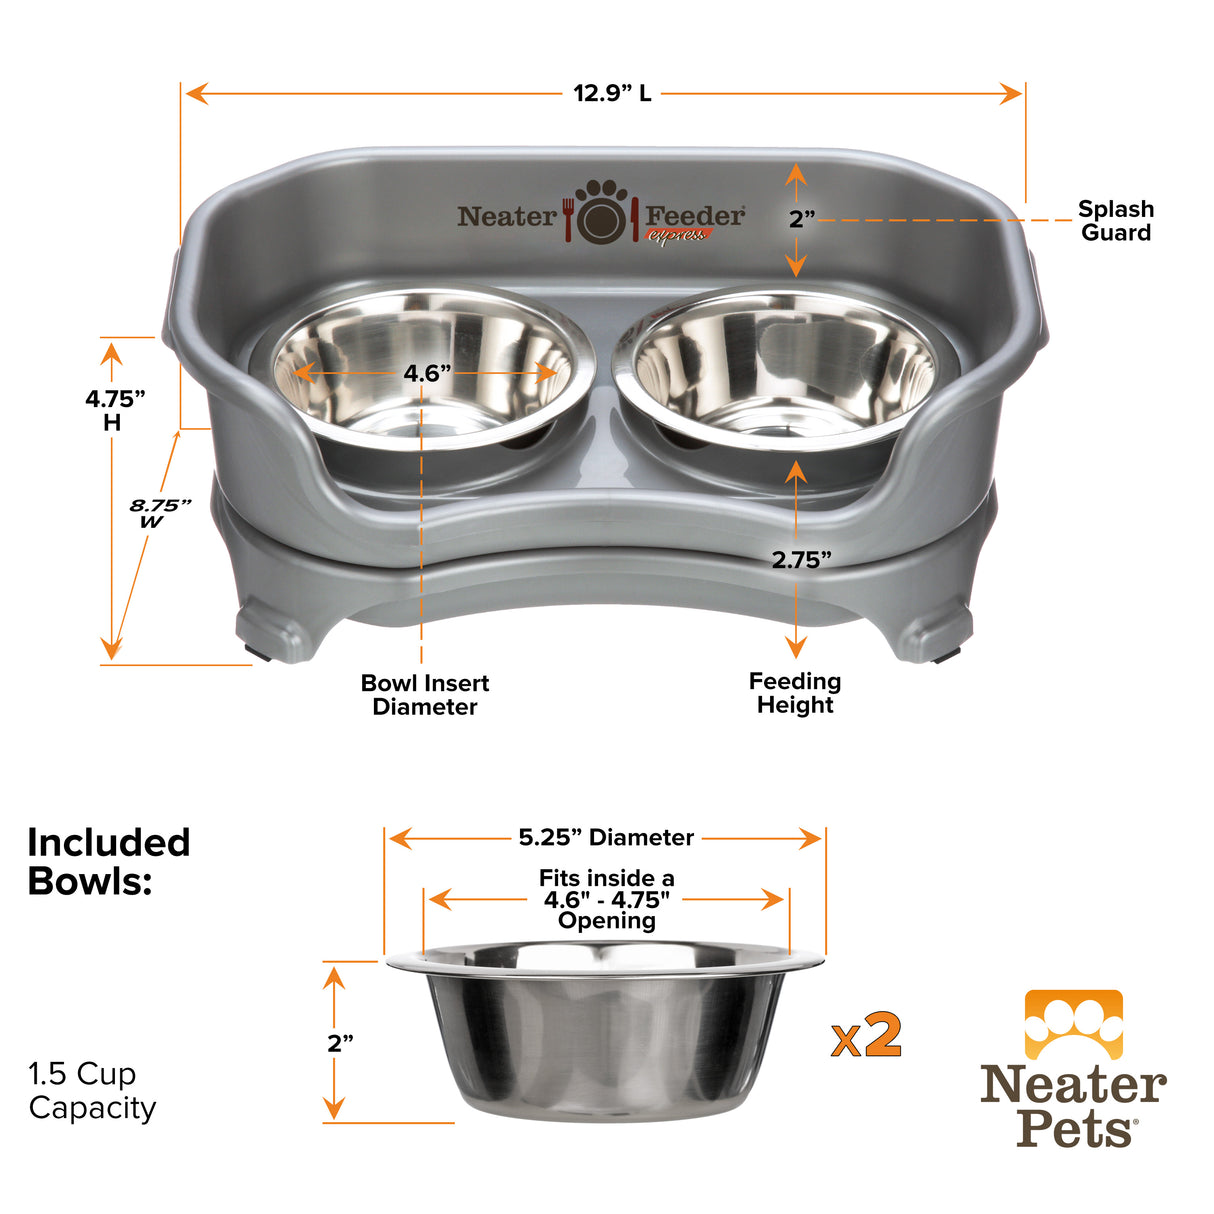 Elevated Dog Bowl for Large Dogs,Raised Dog Bowl Stand,Adjusts to 8 Heights  (2.75- 20) Dog Feeding Station with 2 Stainless Steel Dog Bowls,for